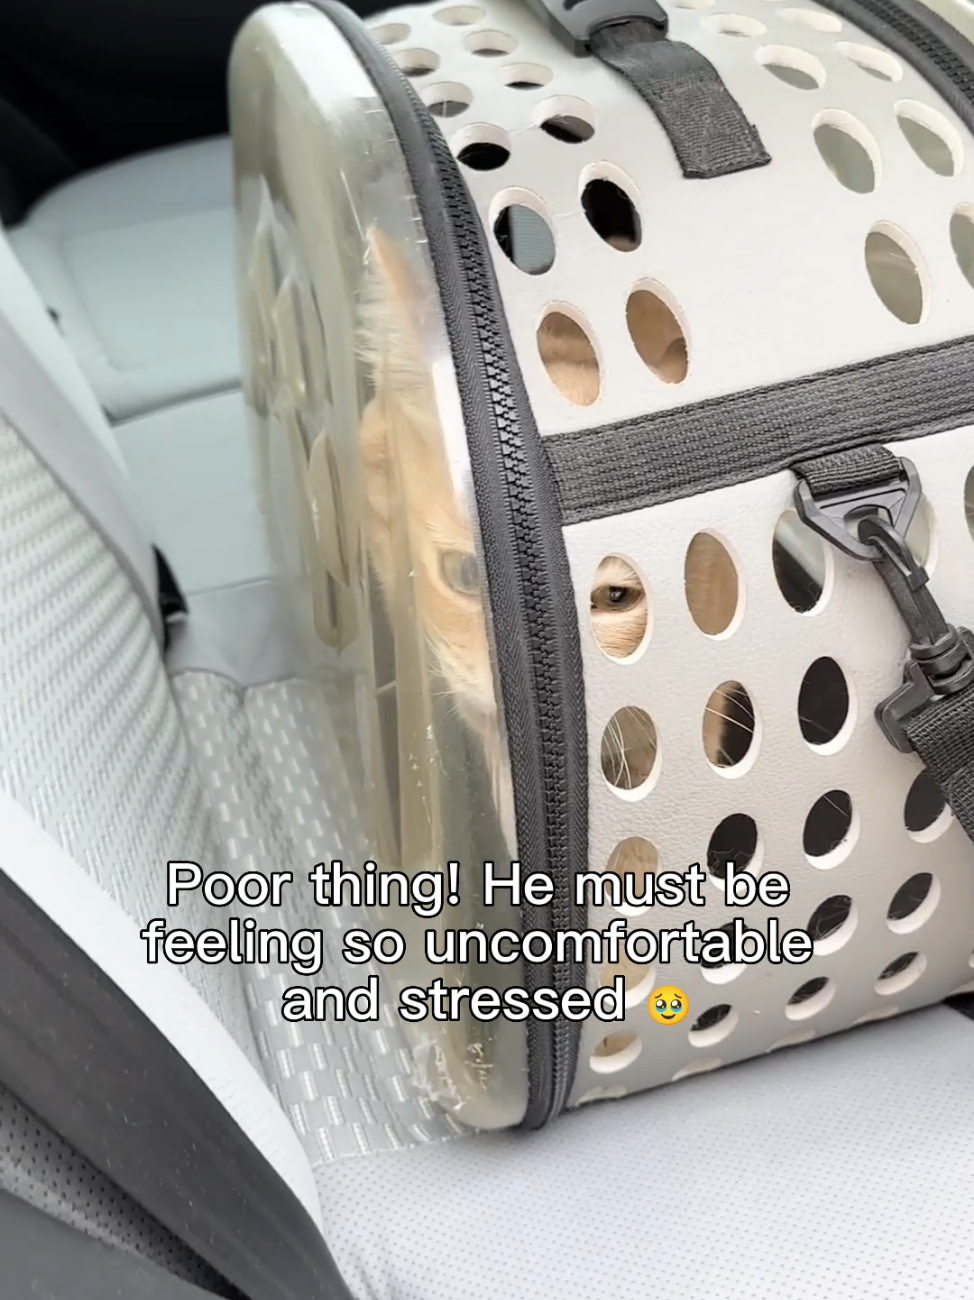 Caught my cat Salmon crying in the carrier